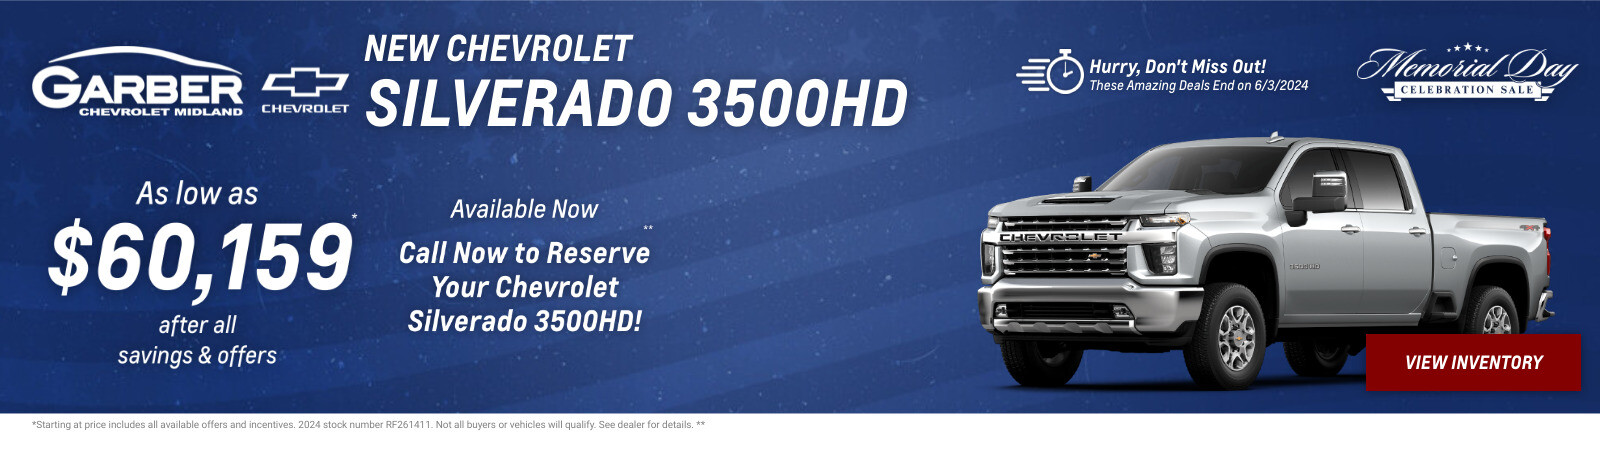 New Chevrolet Silverado Current Deals and Offers in Midland, MI